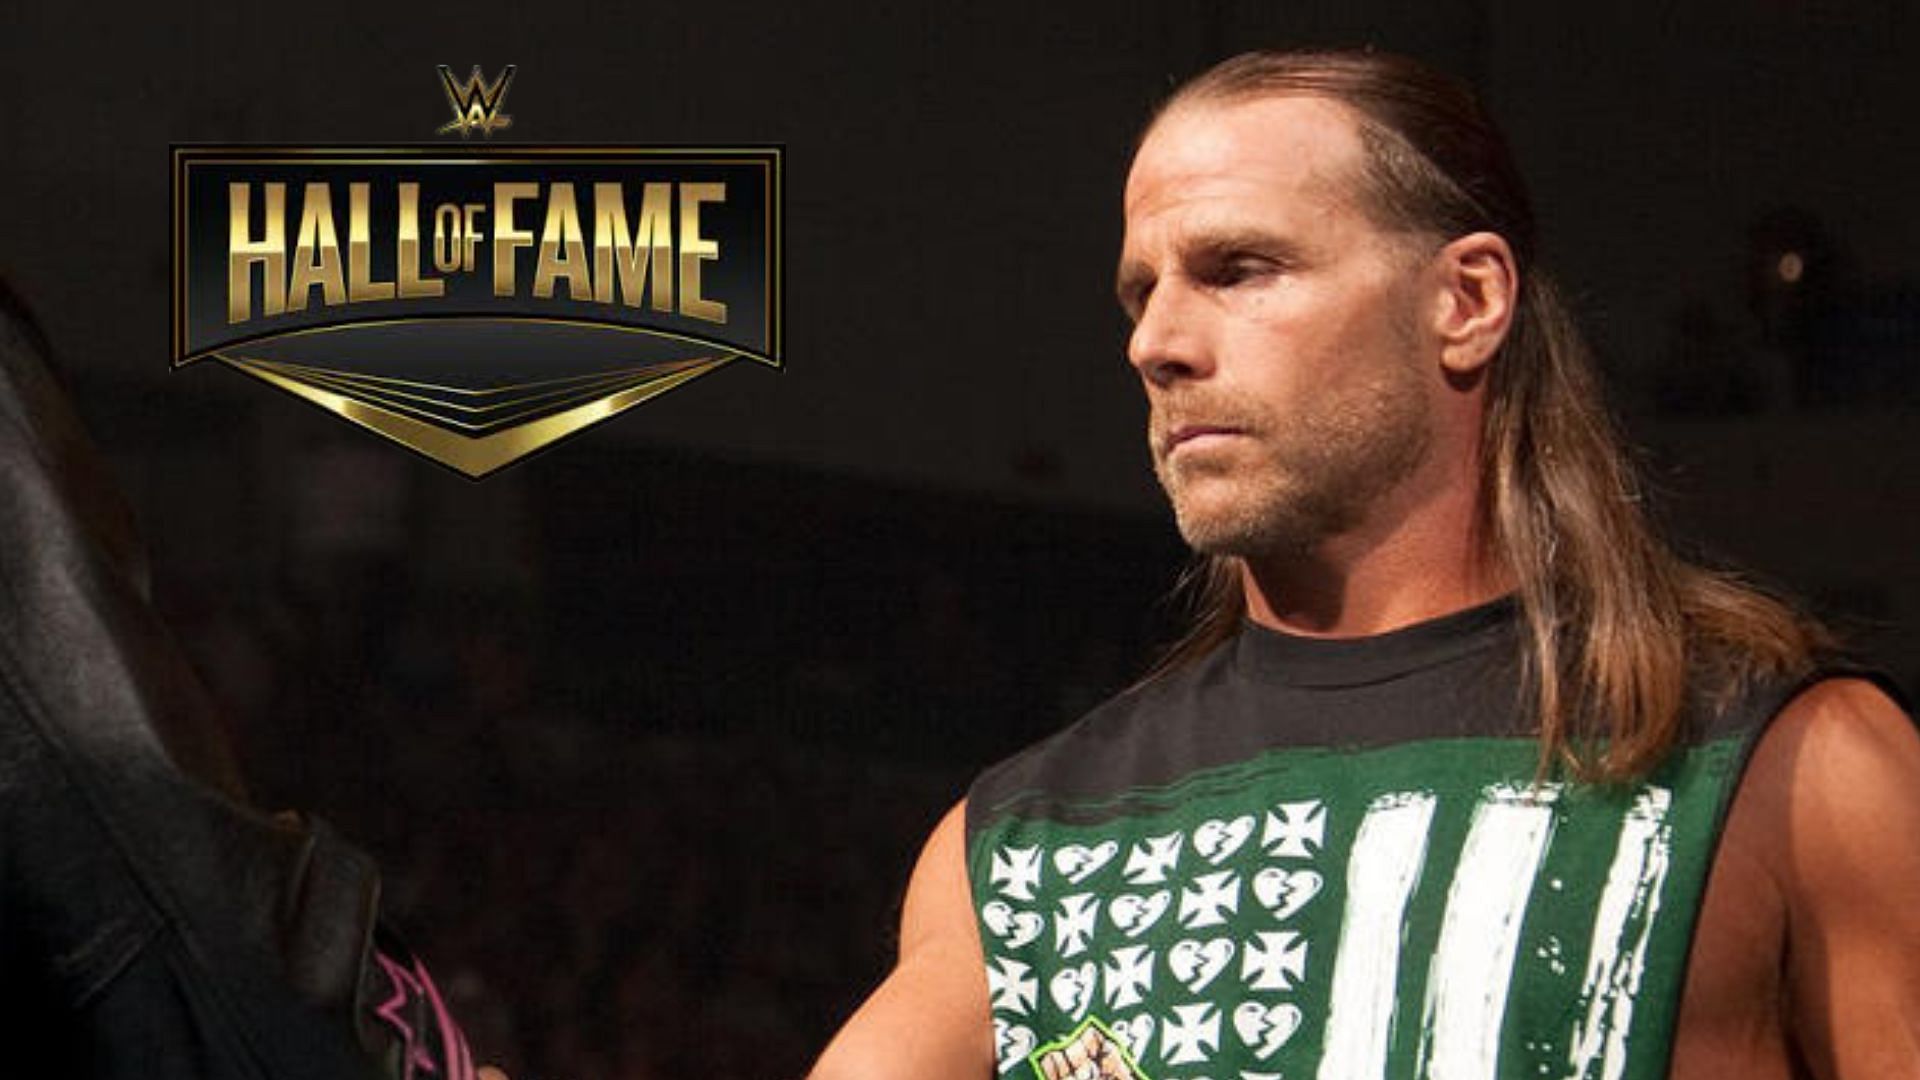 Shawn Michaels was inducted into the Hall of Fame twice